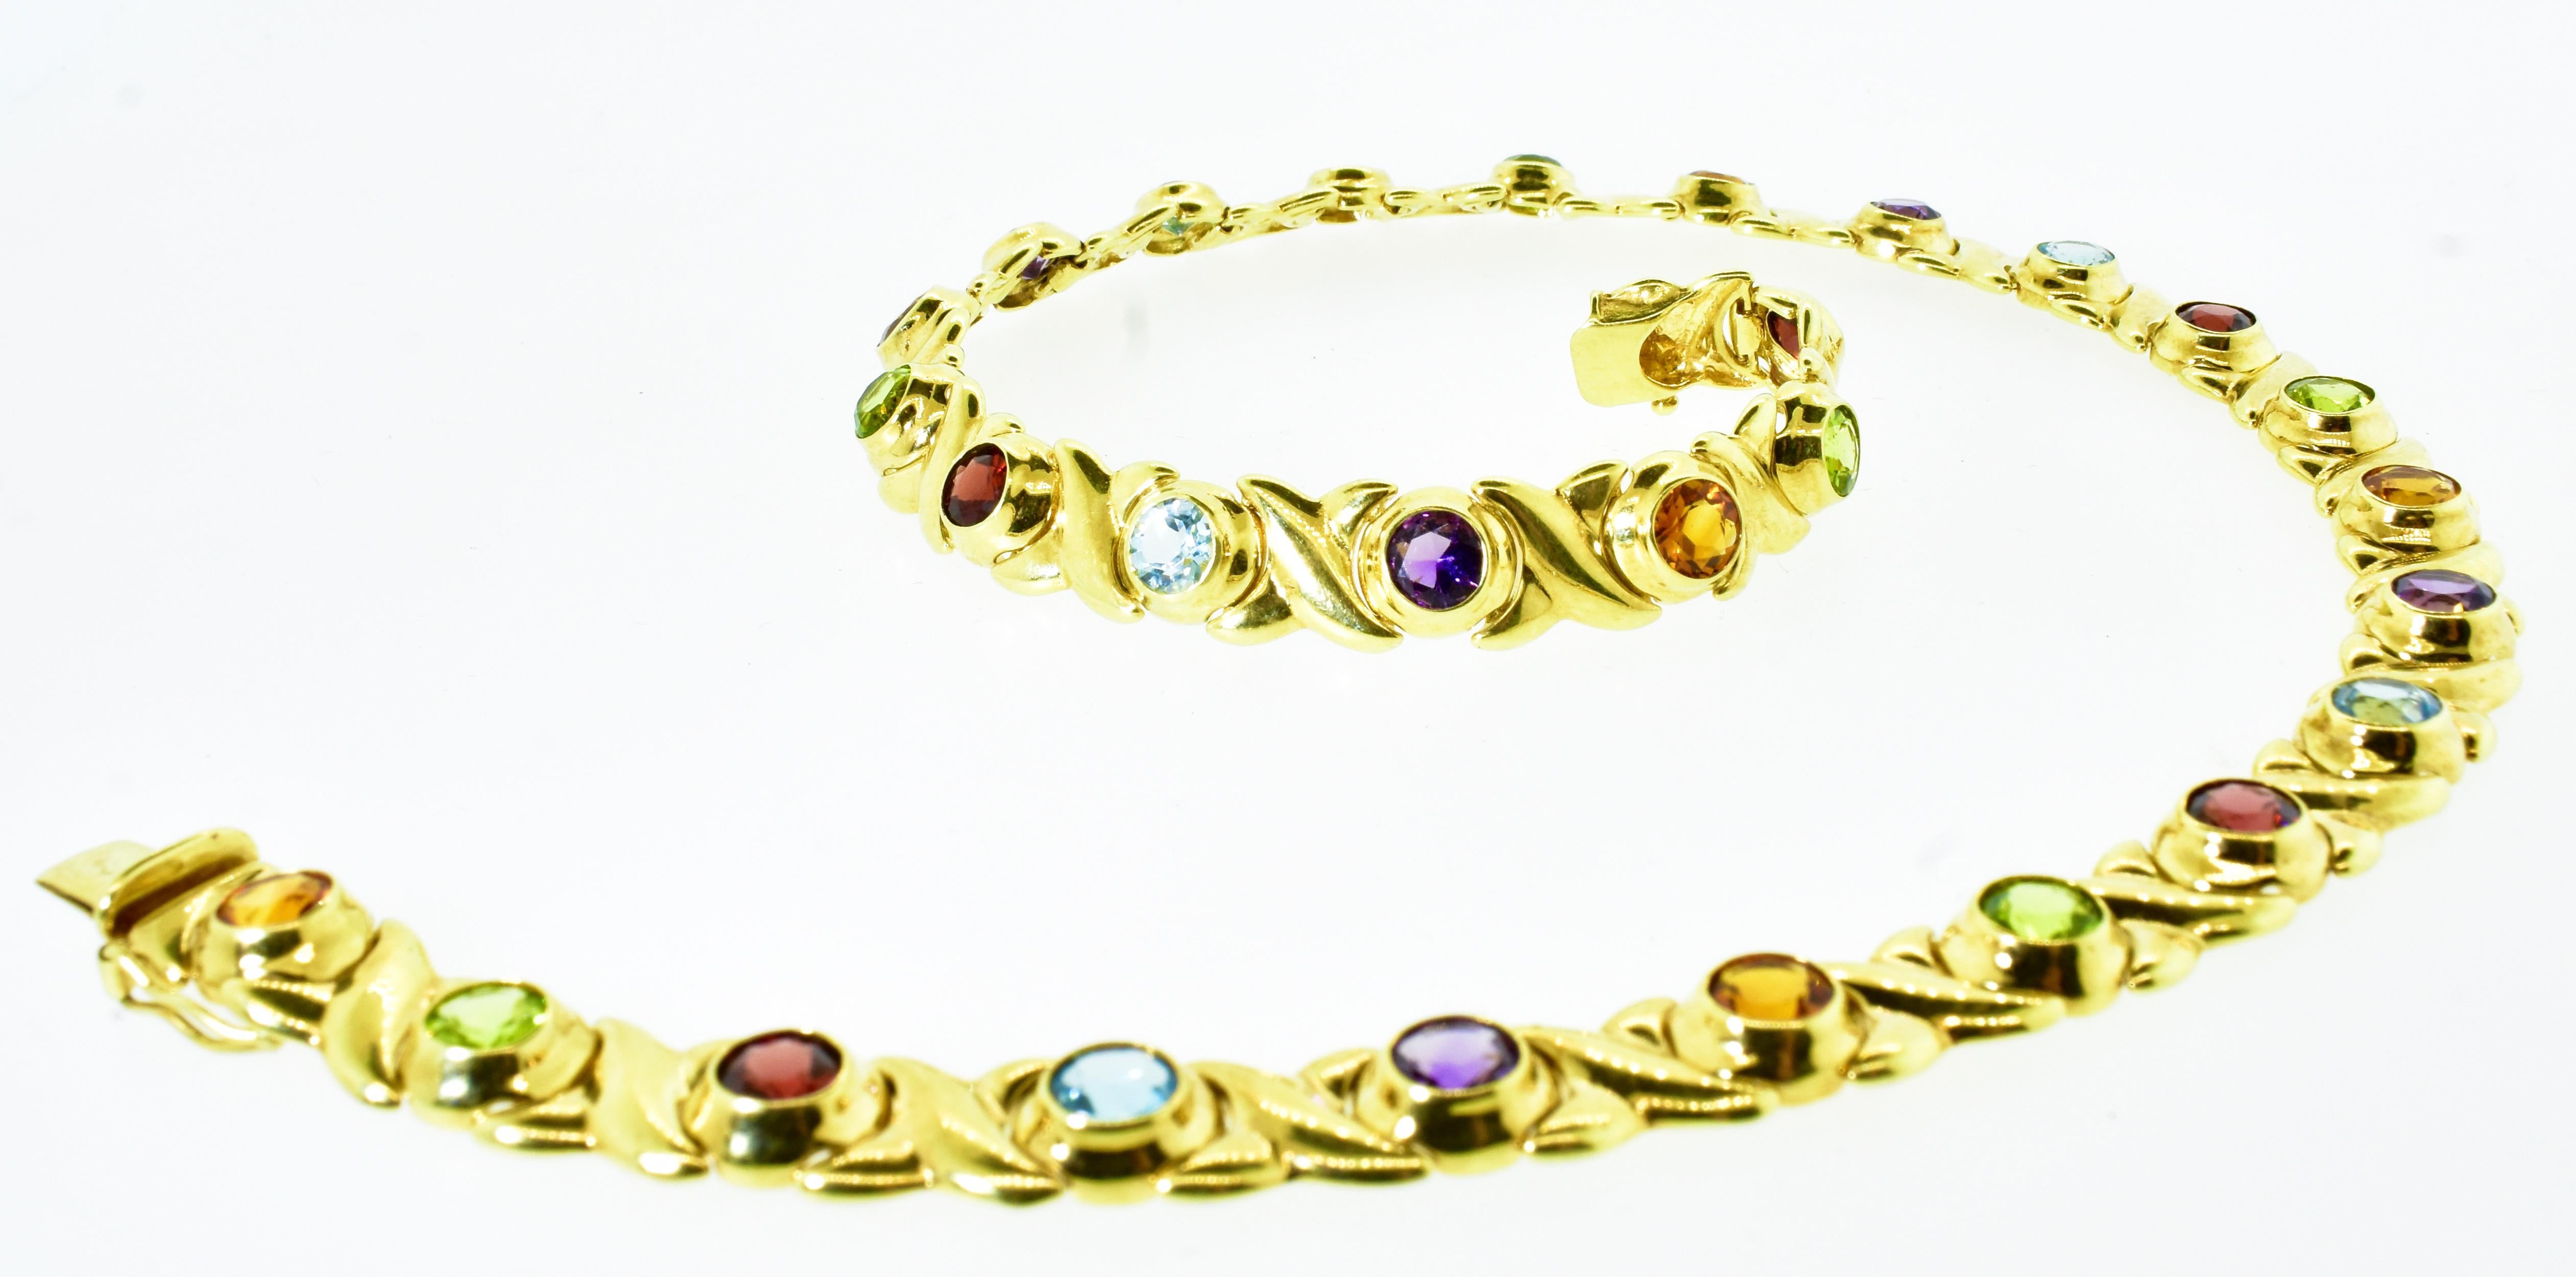 Gem Set Yellow Gold Vintage Necklace with Peridot, Amethyst, Citrine, and Garnet For Sale 8